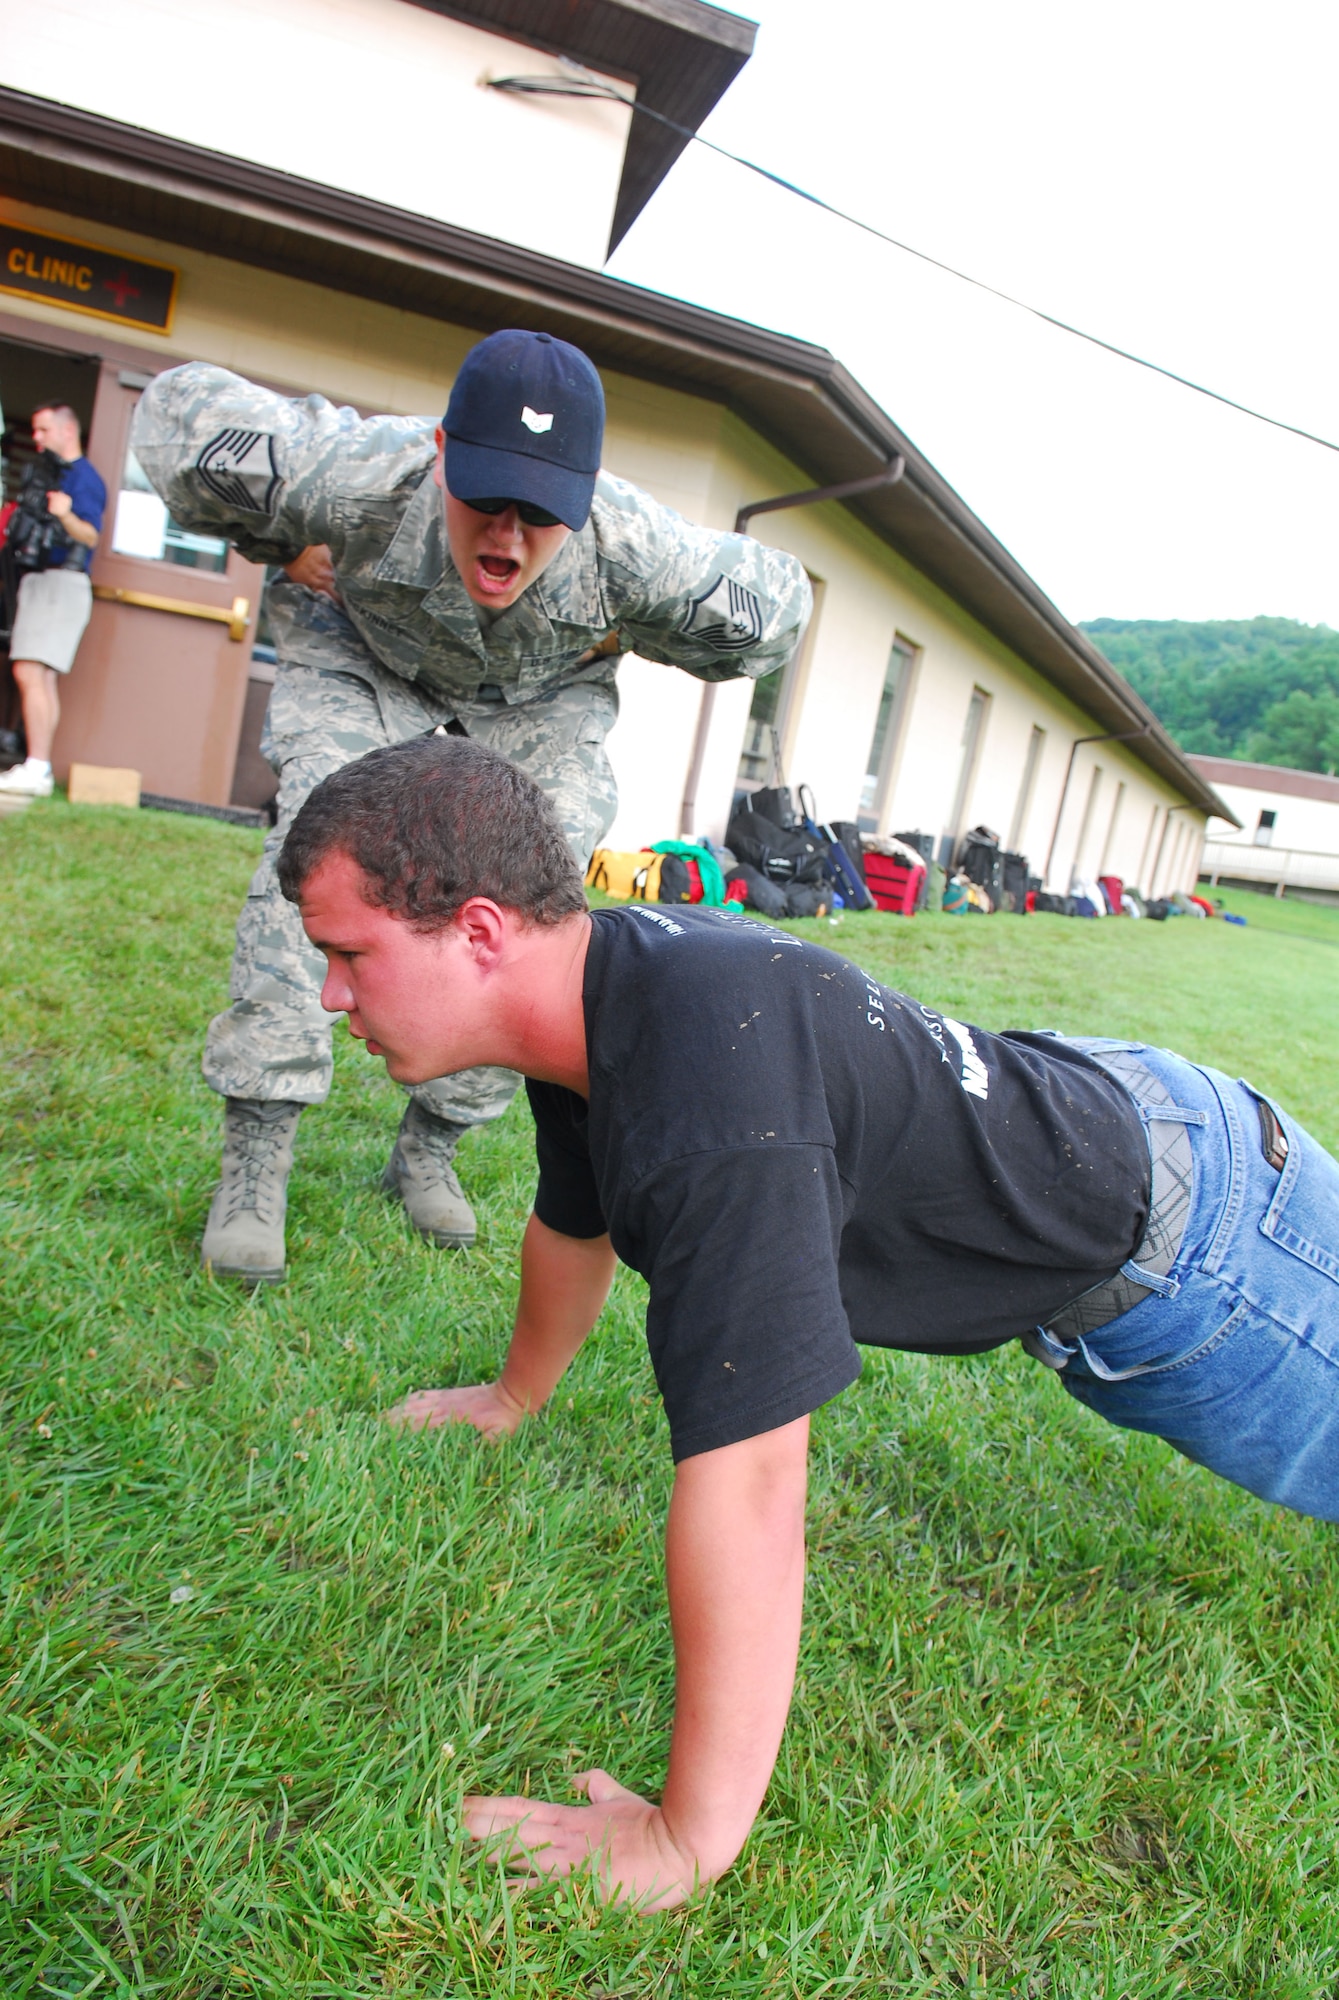 167th Airlift Wing member, Master Sergeant Kelley McKinney, a TAC (Train, Advise, Counsel) leader for the West Virginia Youth Leaders Camp, instructs a camper on proper push-up technique on the first day of the camp at Camp Dawson near Kingwood, WV. Sixty-six high schoolers from West Virginia participated in the week-long camp now in its forty-third year. Youth Leaders Camp, geared toward building confidence and instilling leadership skills, challenges the campers with mentally and physically demanding activities. (U.S. Air Force Photo by MSgt Emily Beightol-Deyerle)